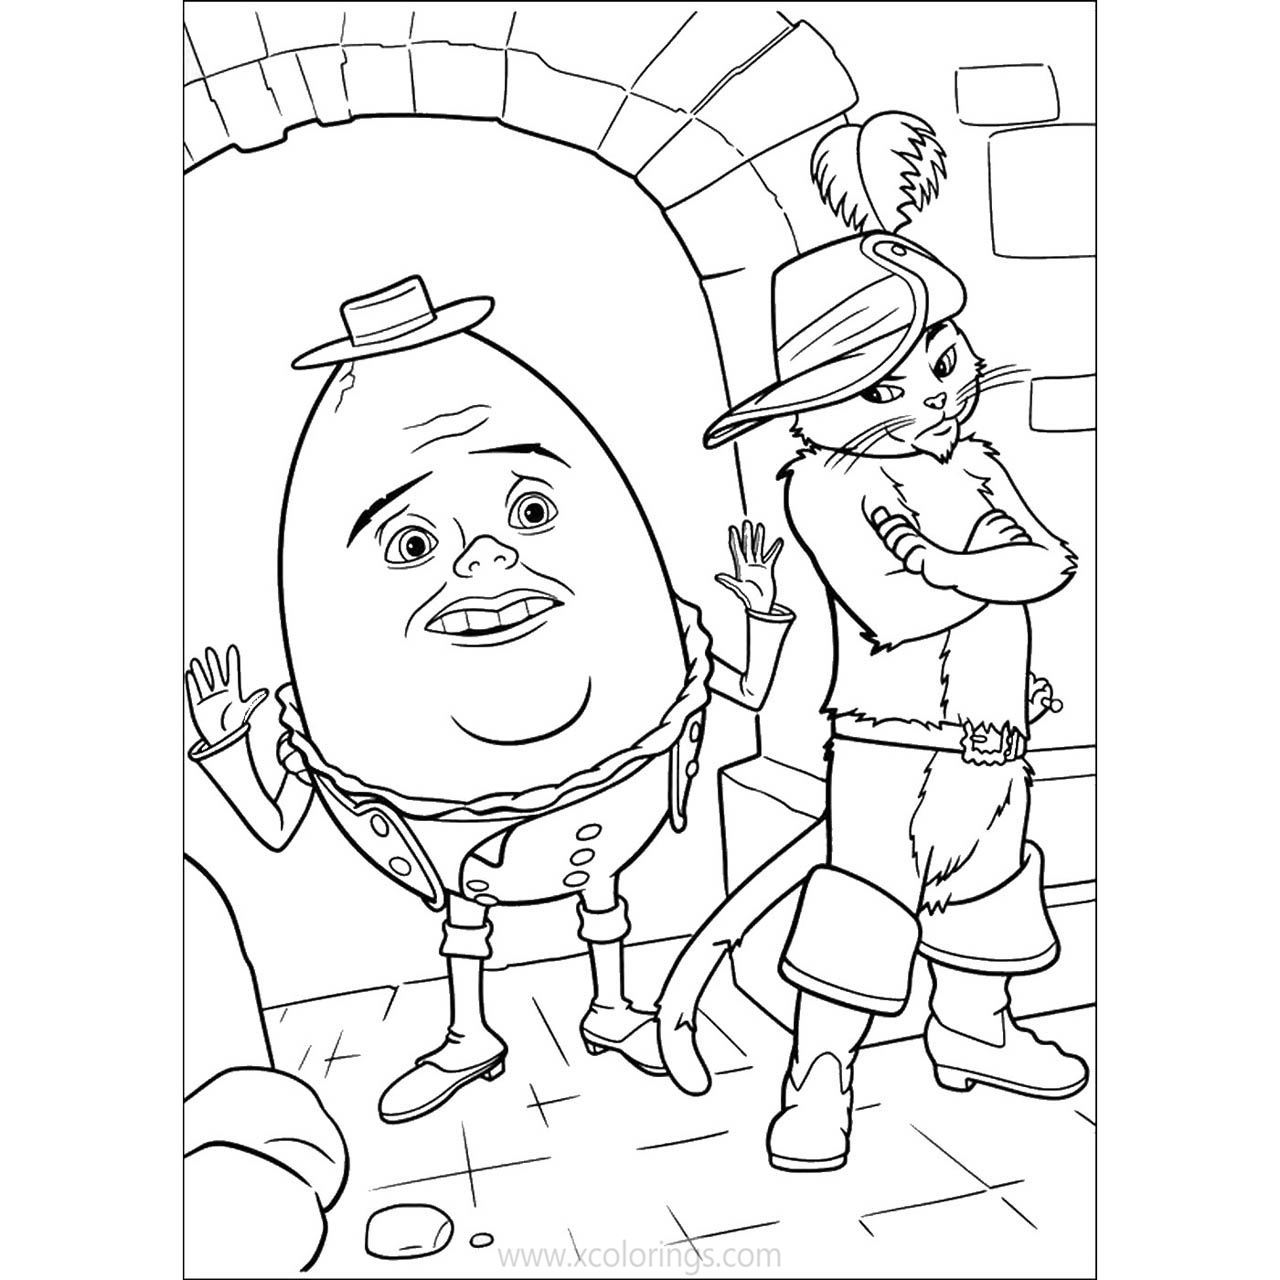 Free Puss in Boots Coloring Pages Cat and Humpty Dumpty printable